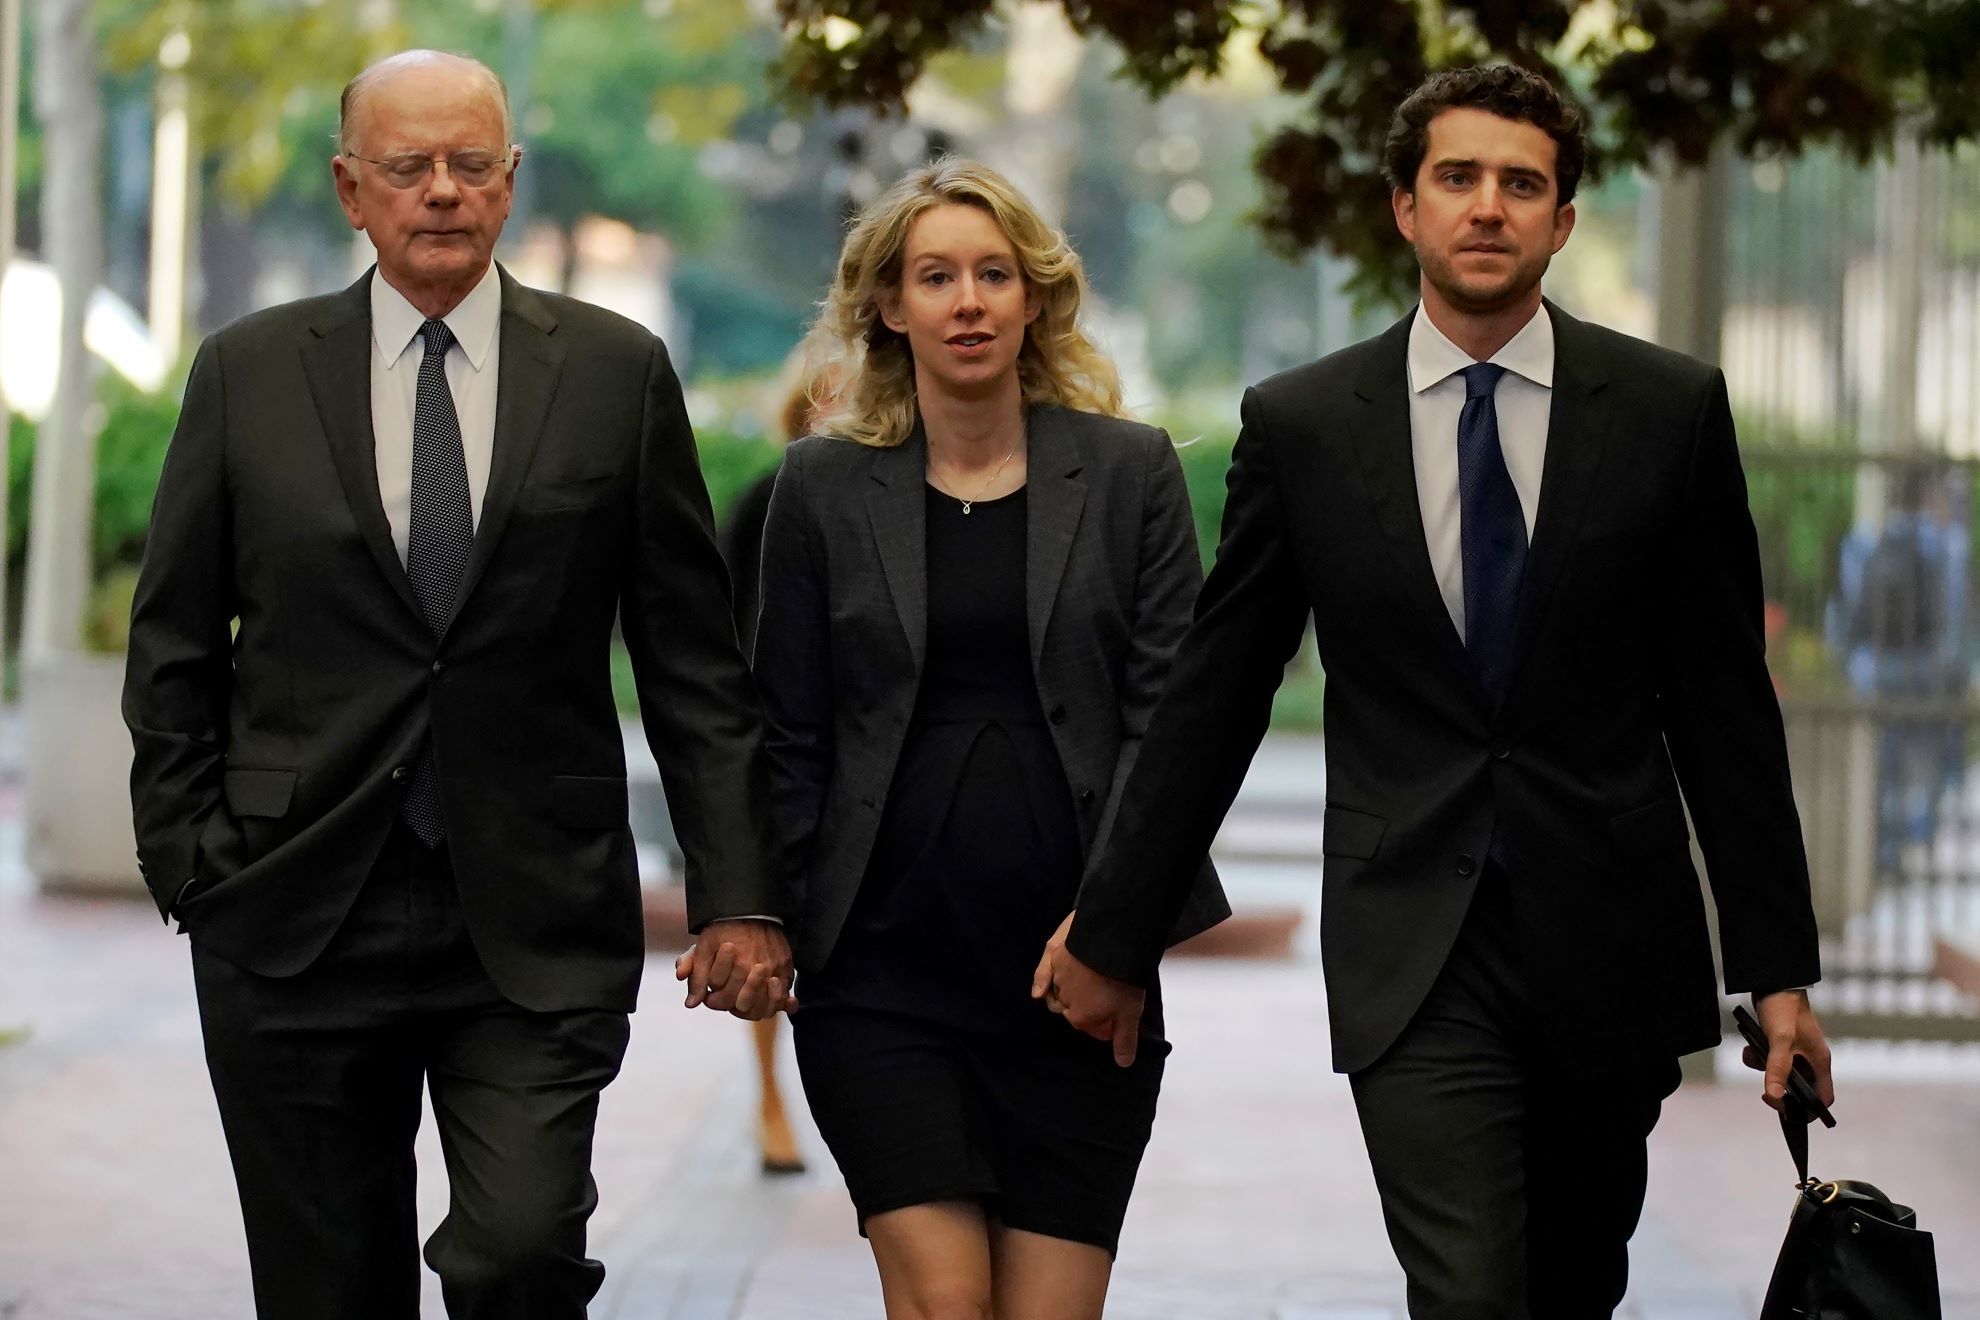 Former Theranos CEO Elizabeth Holmes, center, arrives at federal court with her father, Christian Holmes IV, left, and partner, Billy Evans.